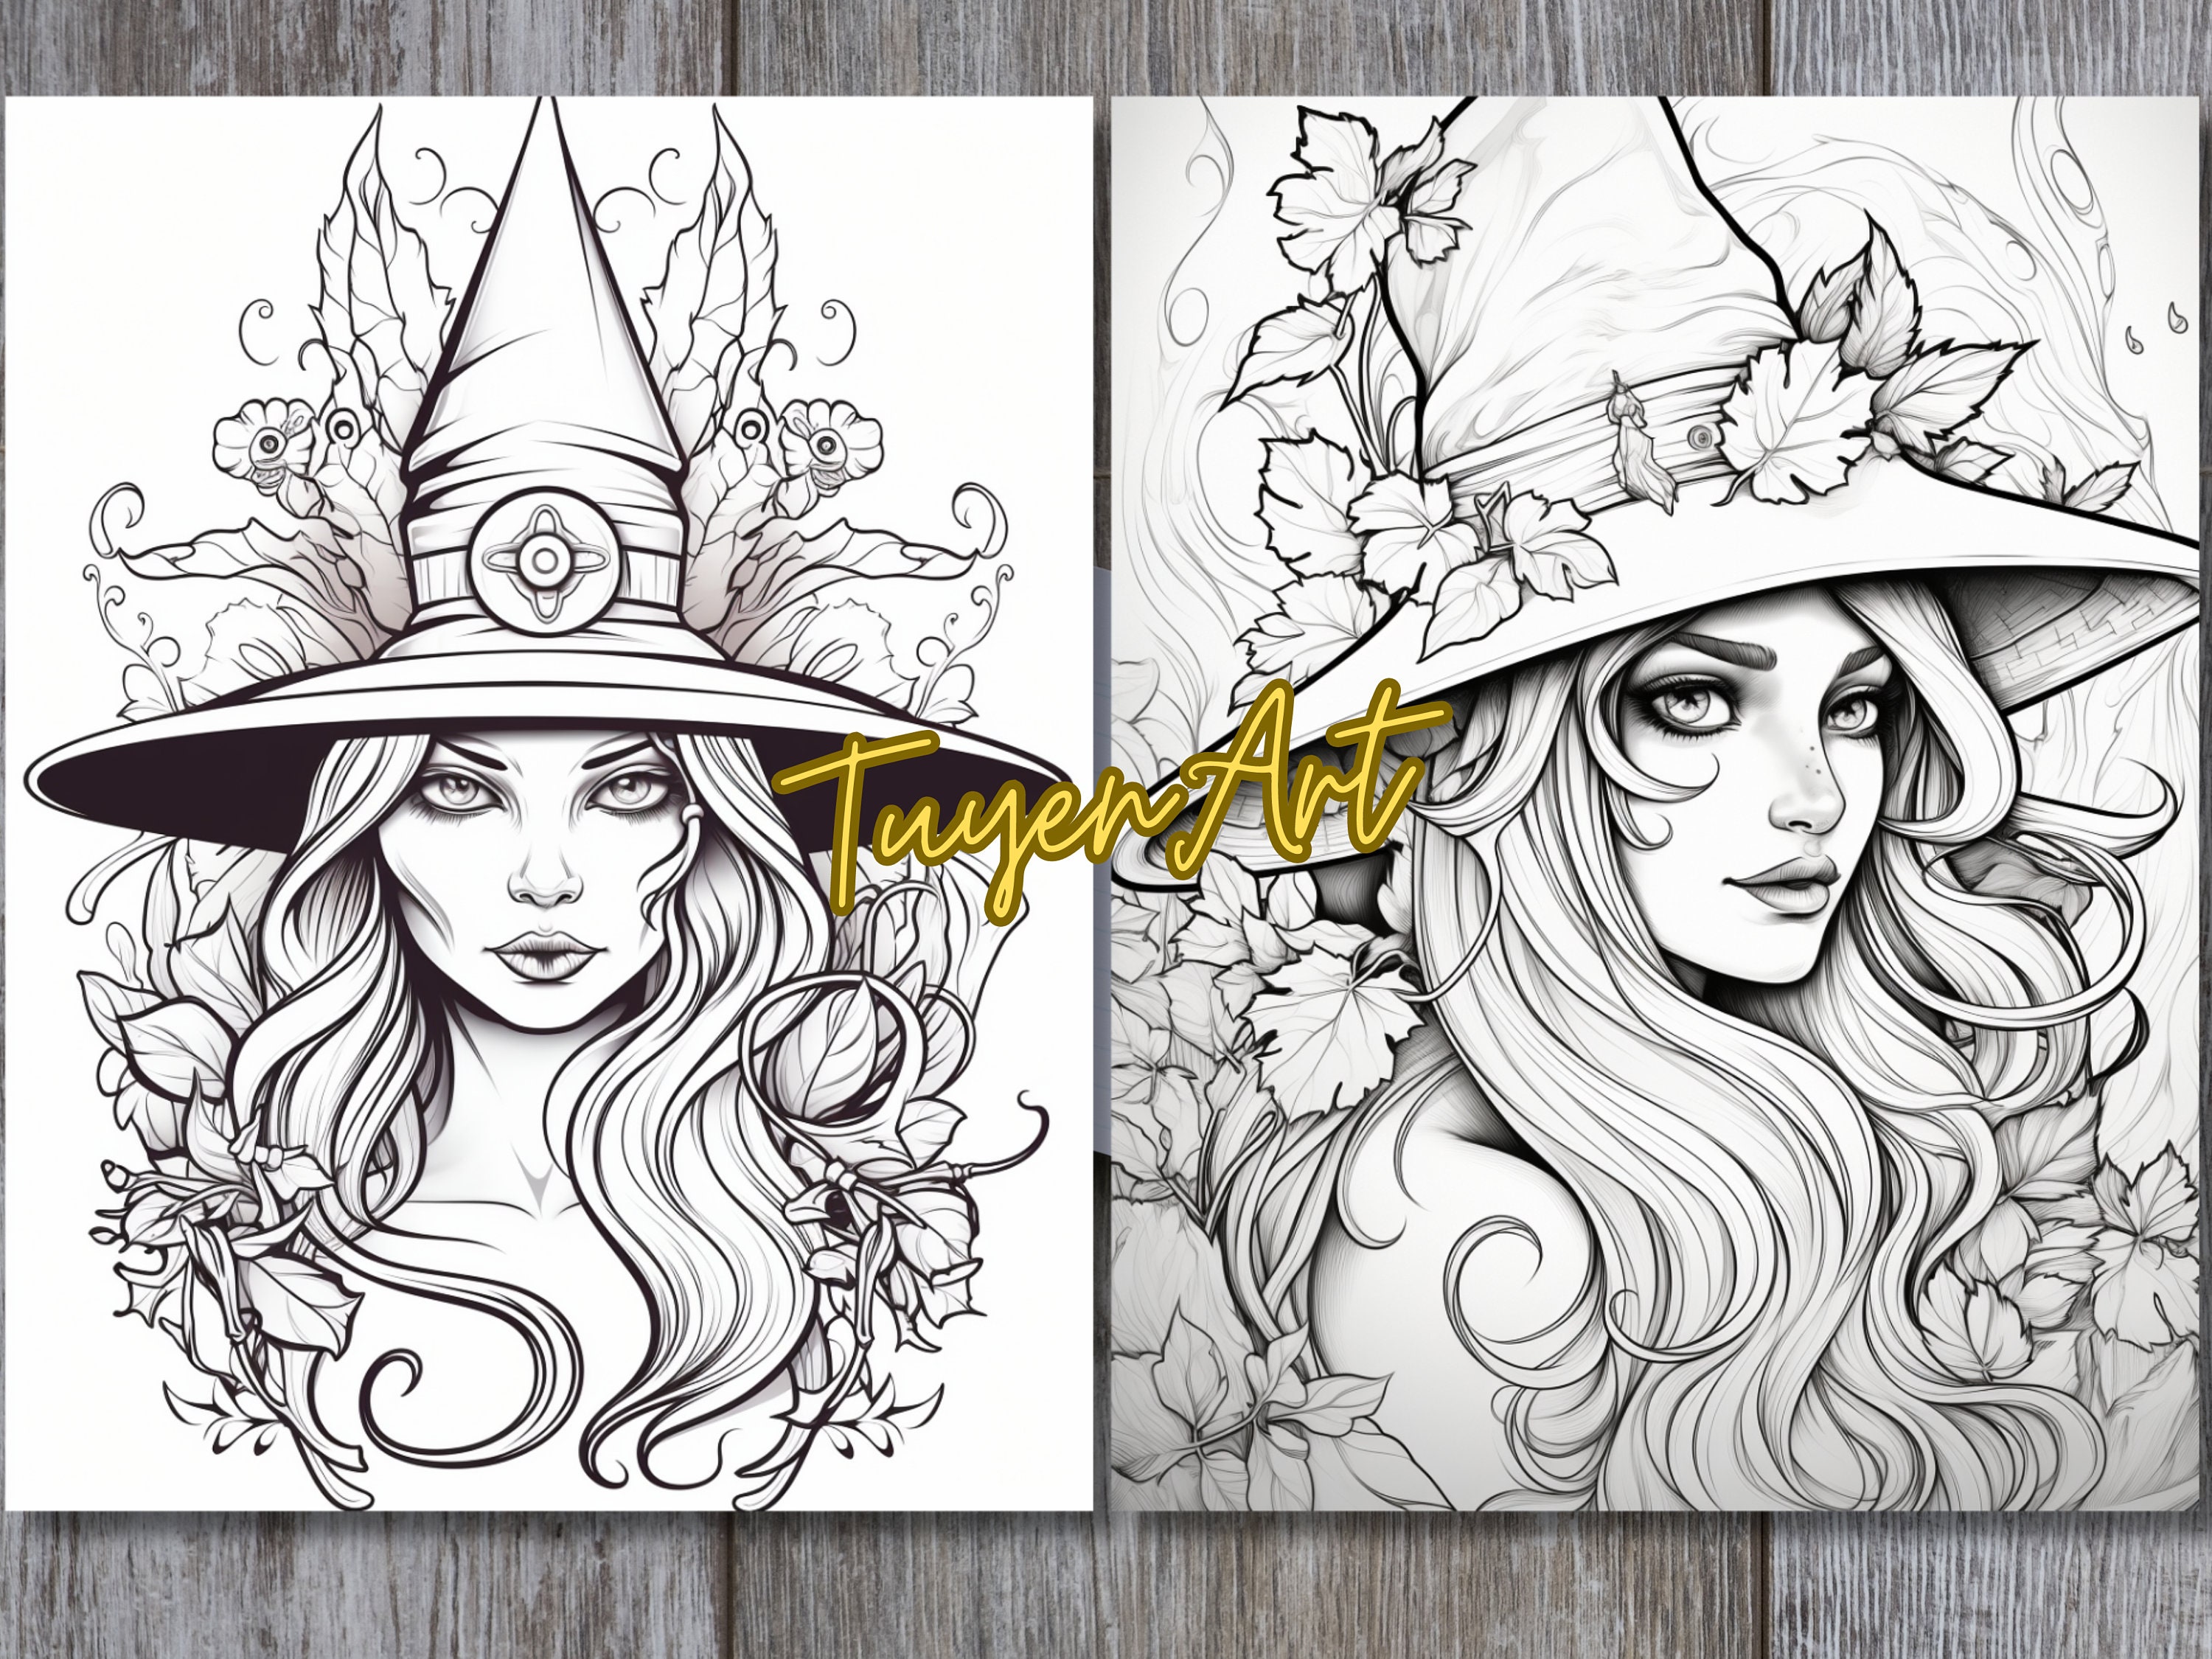 qwertyuiopasdfghjklzxcvbnm  Witch coloring pages, Coloring book art,  Coloring books